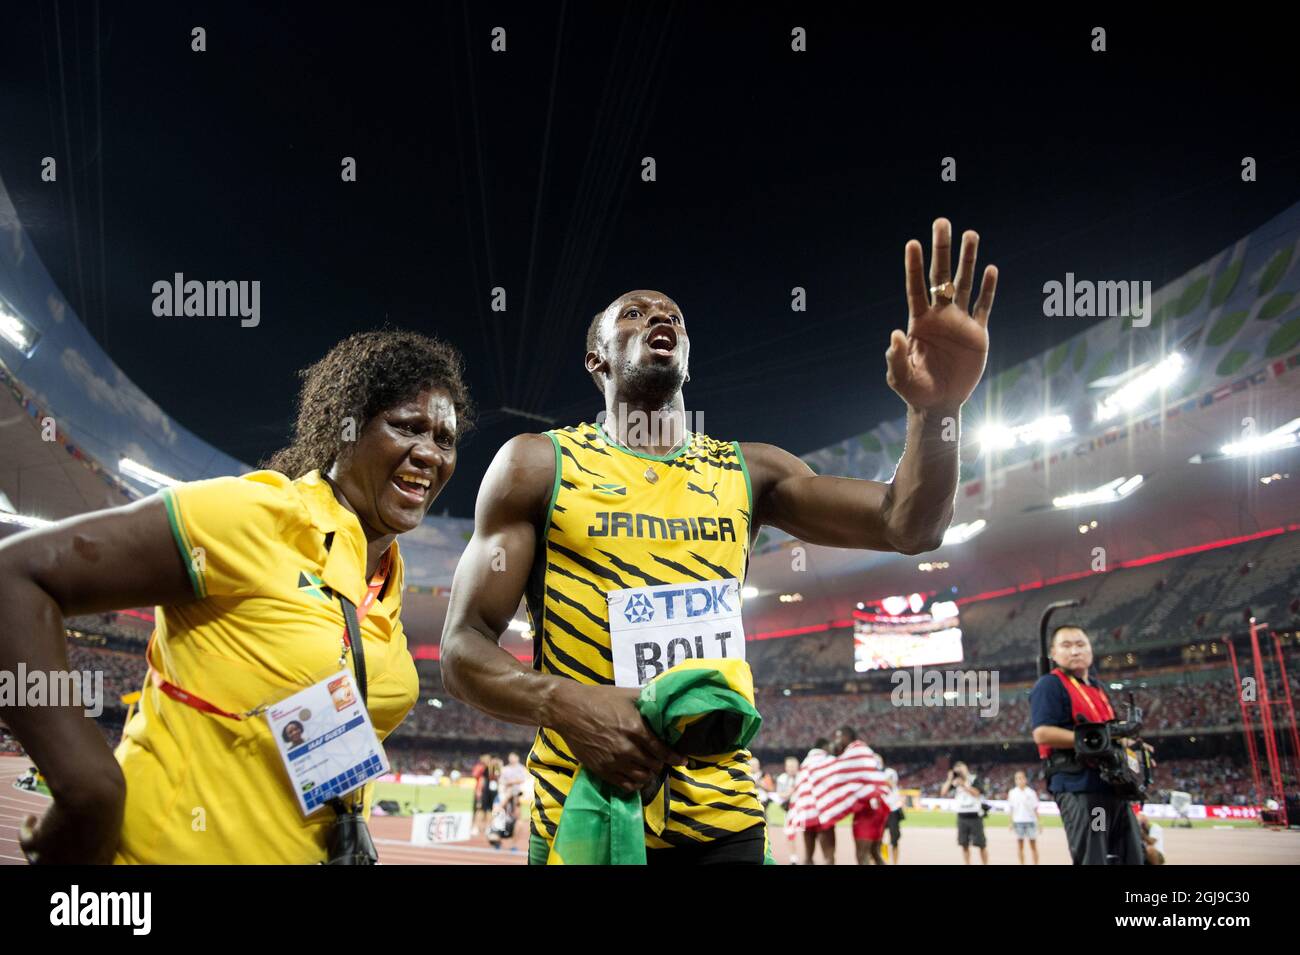 BEIJING 20150823 Usain Bolt of Jamaica with his mother Jennifer Bolt after winning the men's 100m final during the Beijing 2015 IAAF World Championships at the National Stadium in Beijing, China, August 23, 2015. Photo: Jessica Gow / TT / Kod 10070  Stock Photo